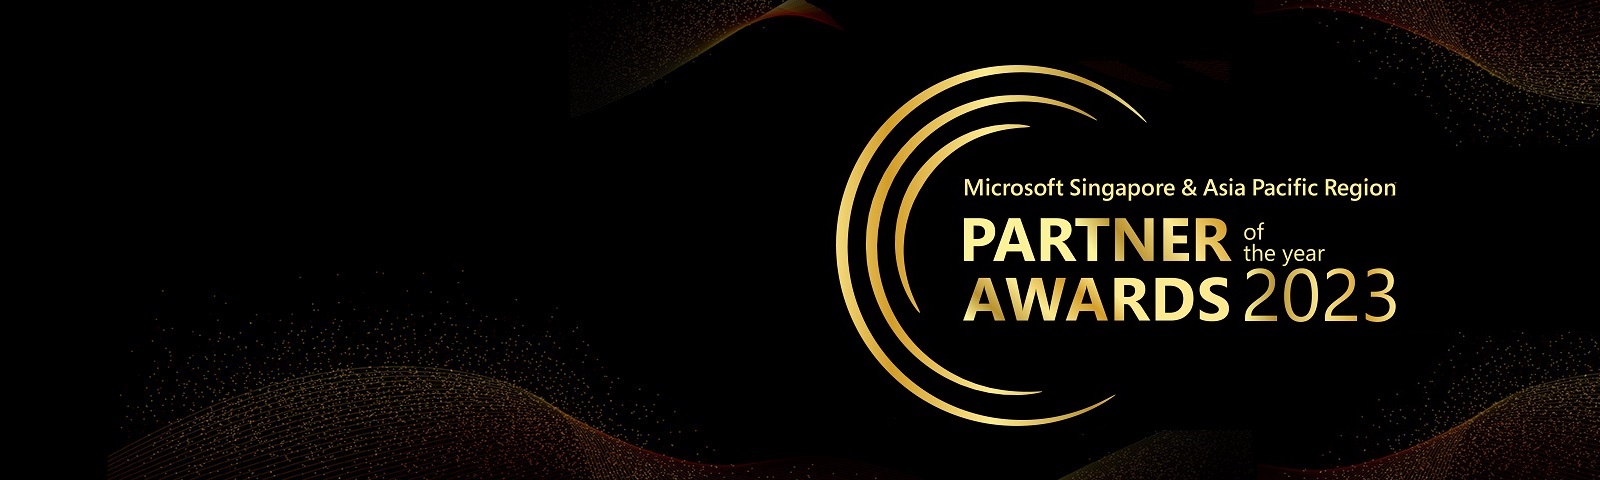 black background with text Microsoft Singapore and Asia Pacific Partner of the Year Awards 2023